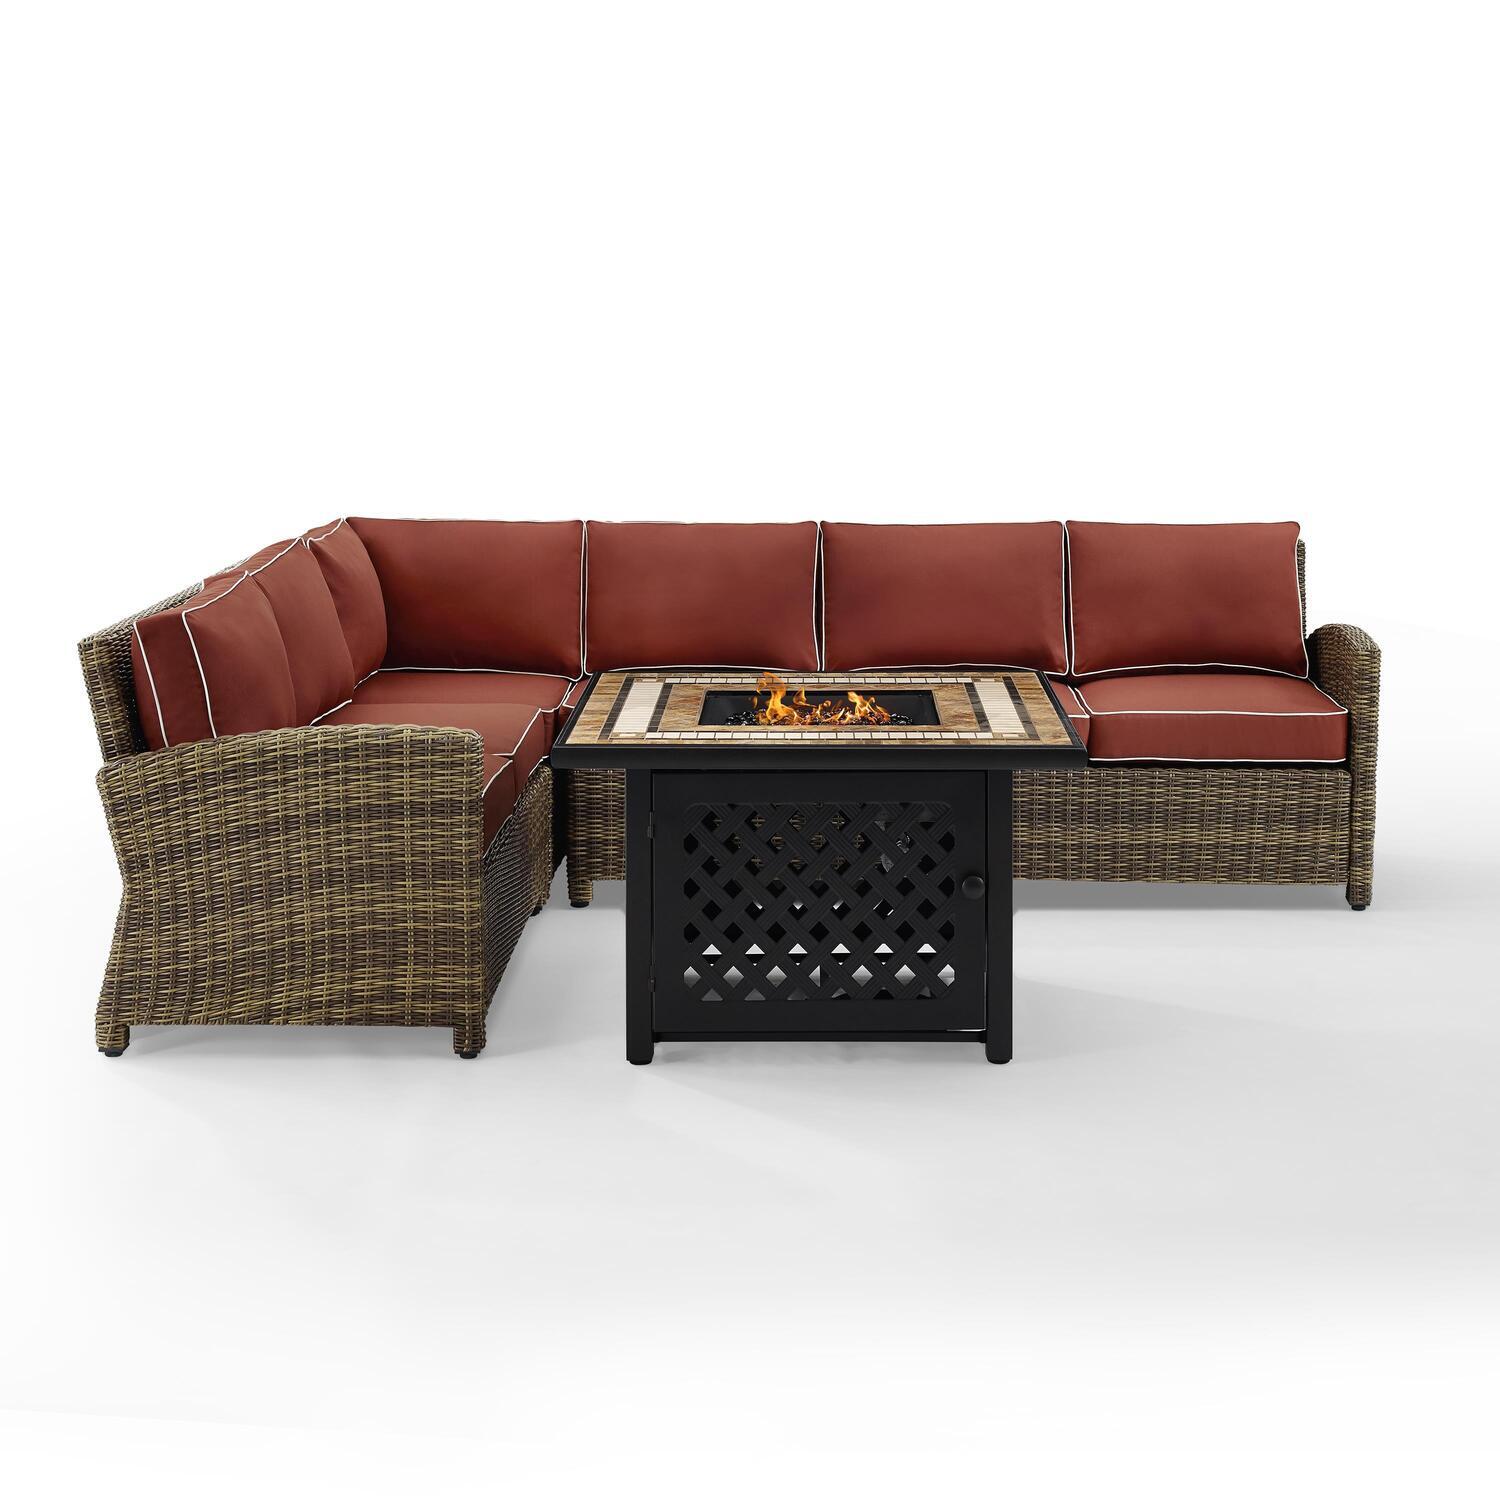 Crosley Furniture Bradenton 5 Piece Fabric Fire Pit Sectional Set in Brown/Red - image 1 of 9